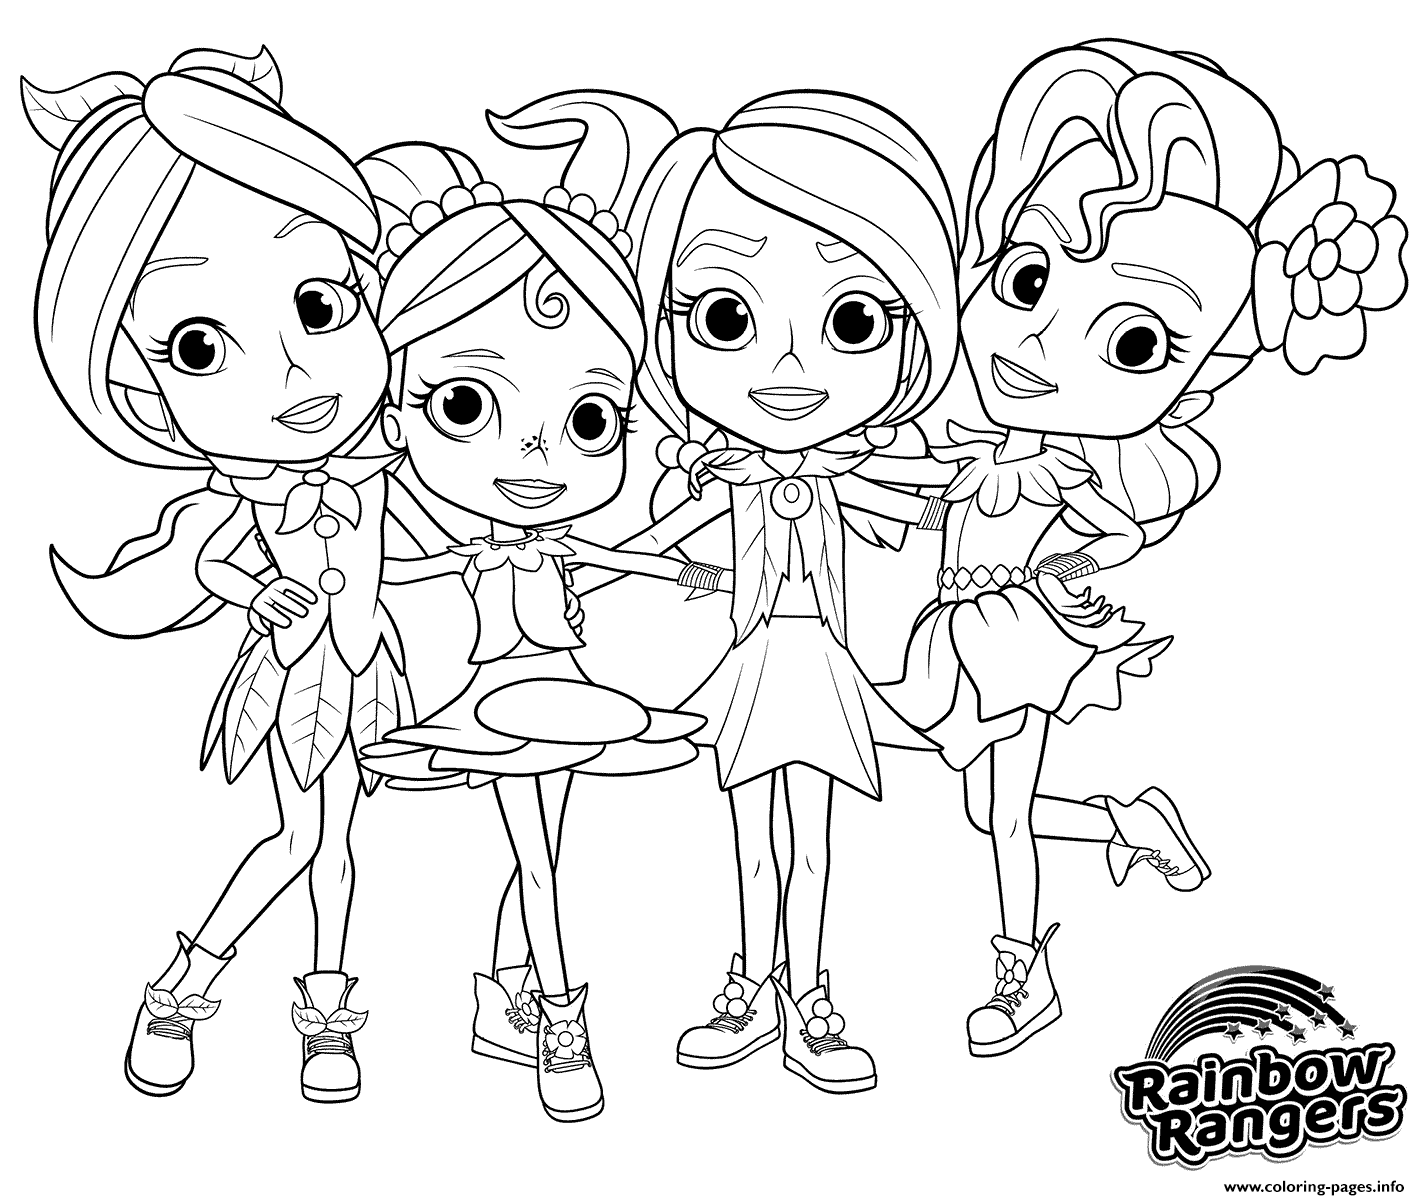 Rainbow Rangers For Girls coloring